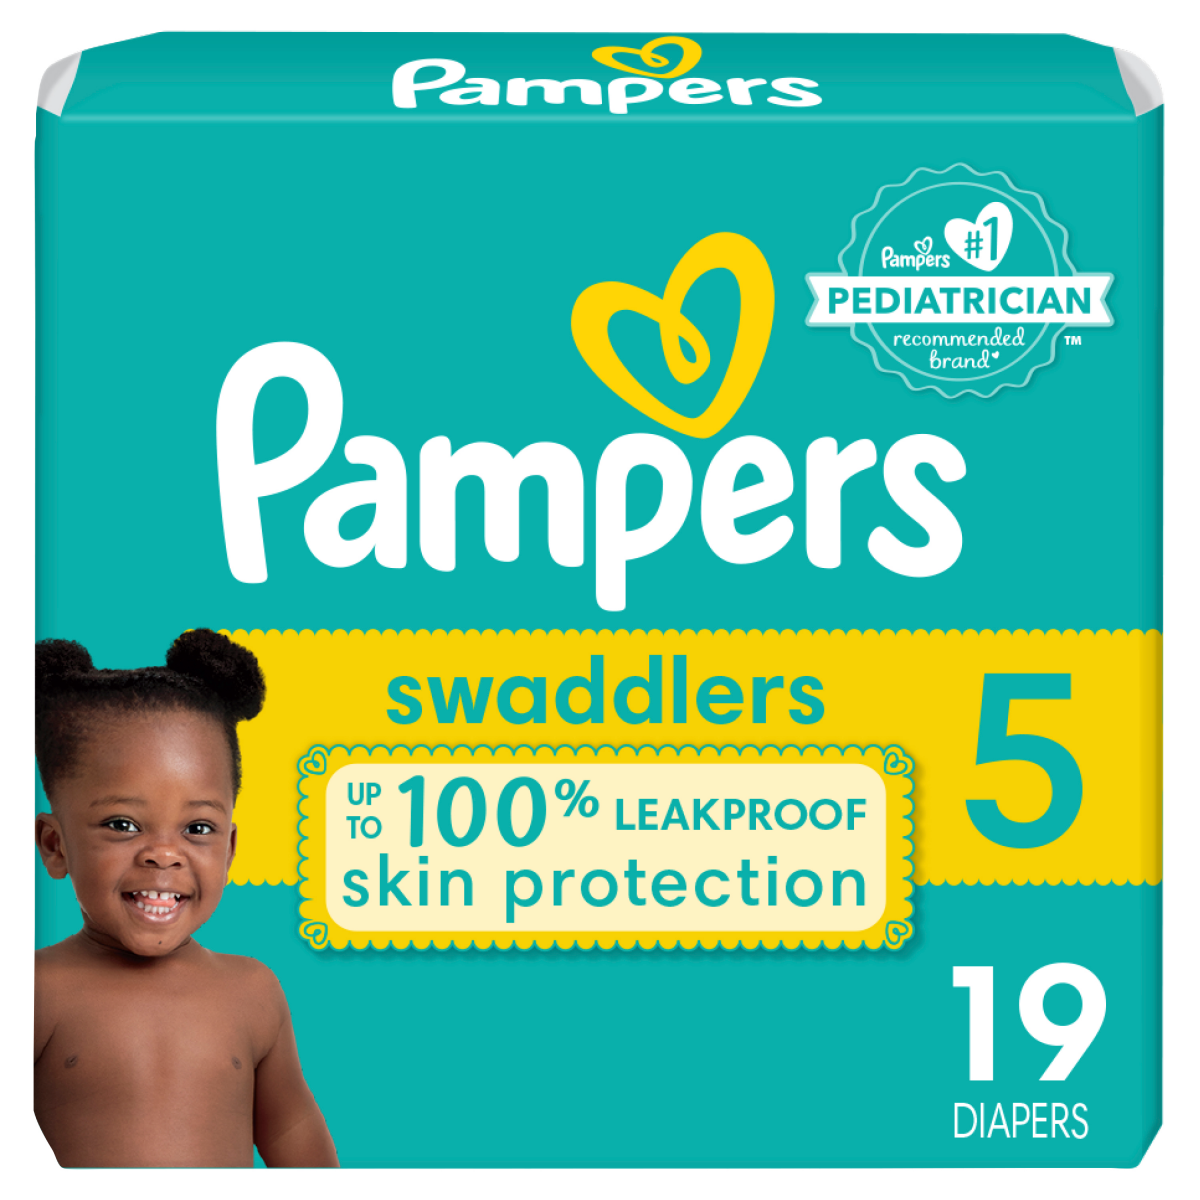 pieluchy 4 pampers 174 hurtownia